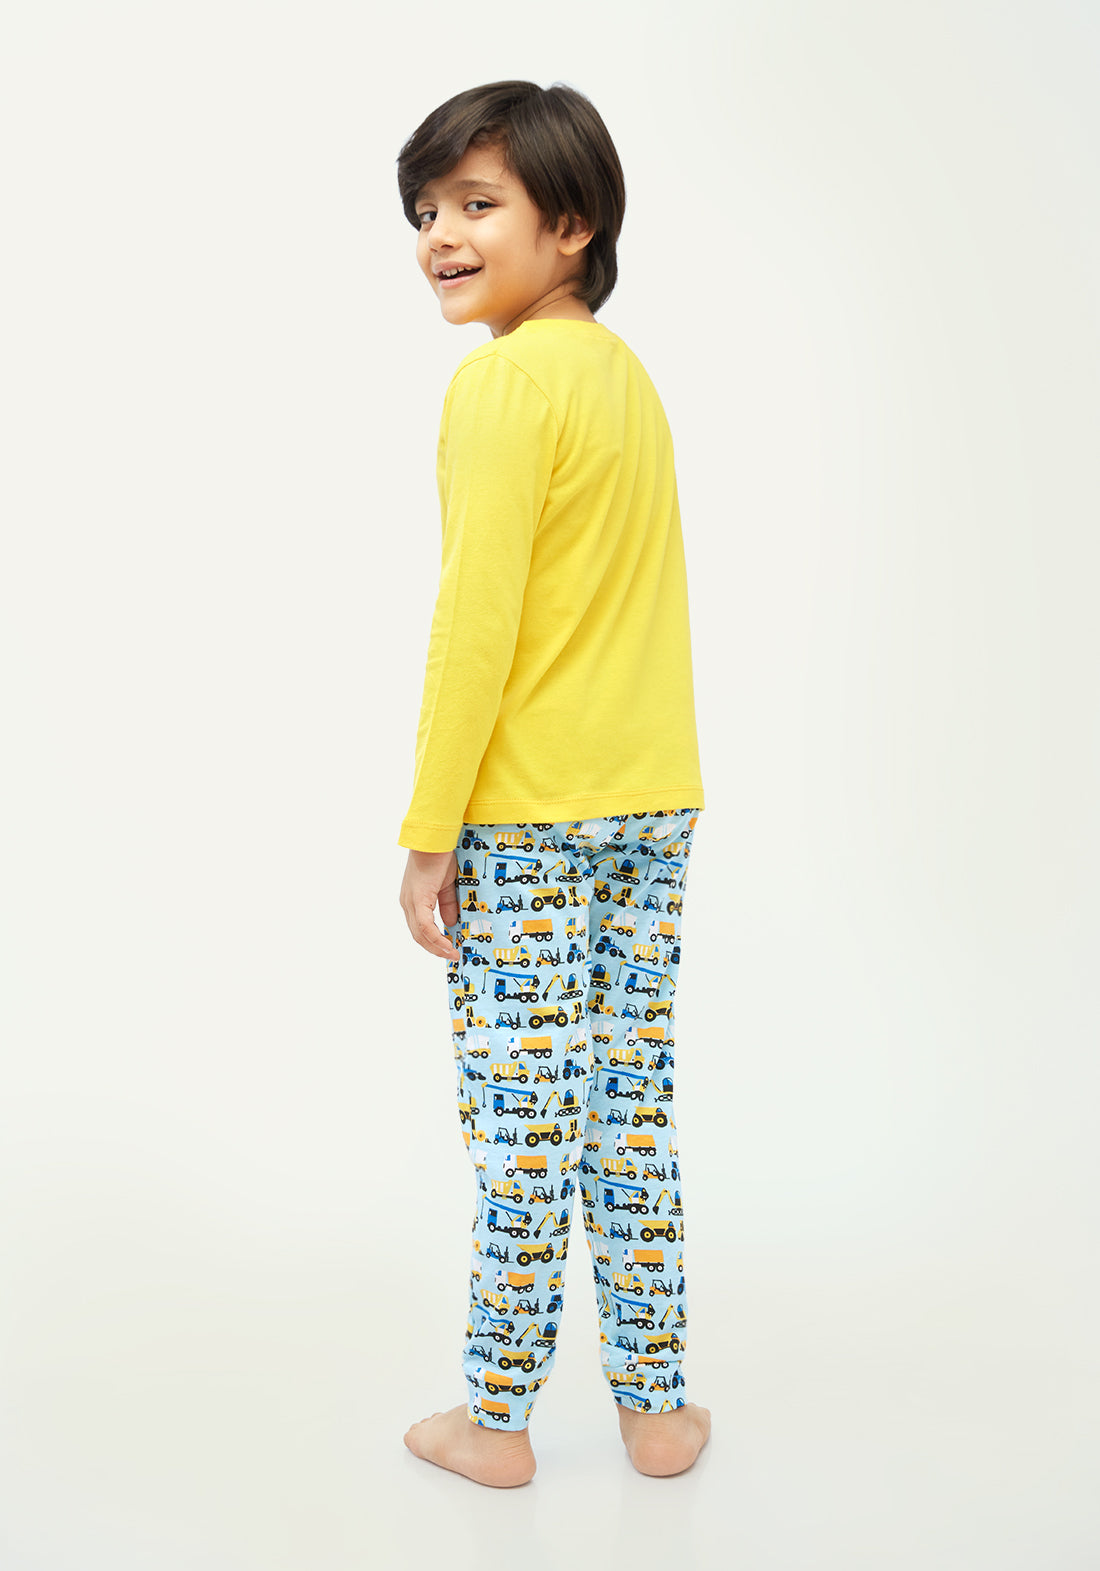 BLUE, BLACK AND YELLOW CONSTRUCTION PRINT Long sleeve tee plus pant in knit